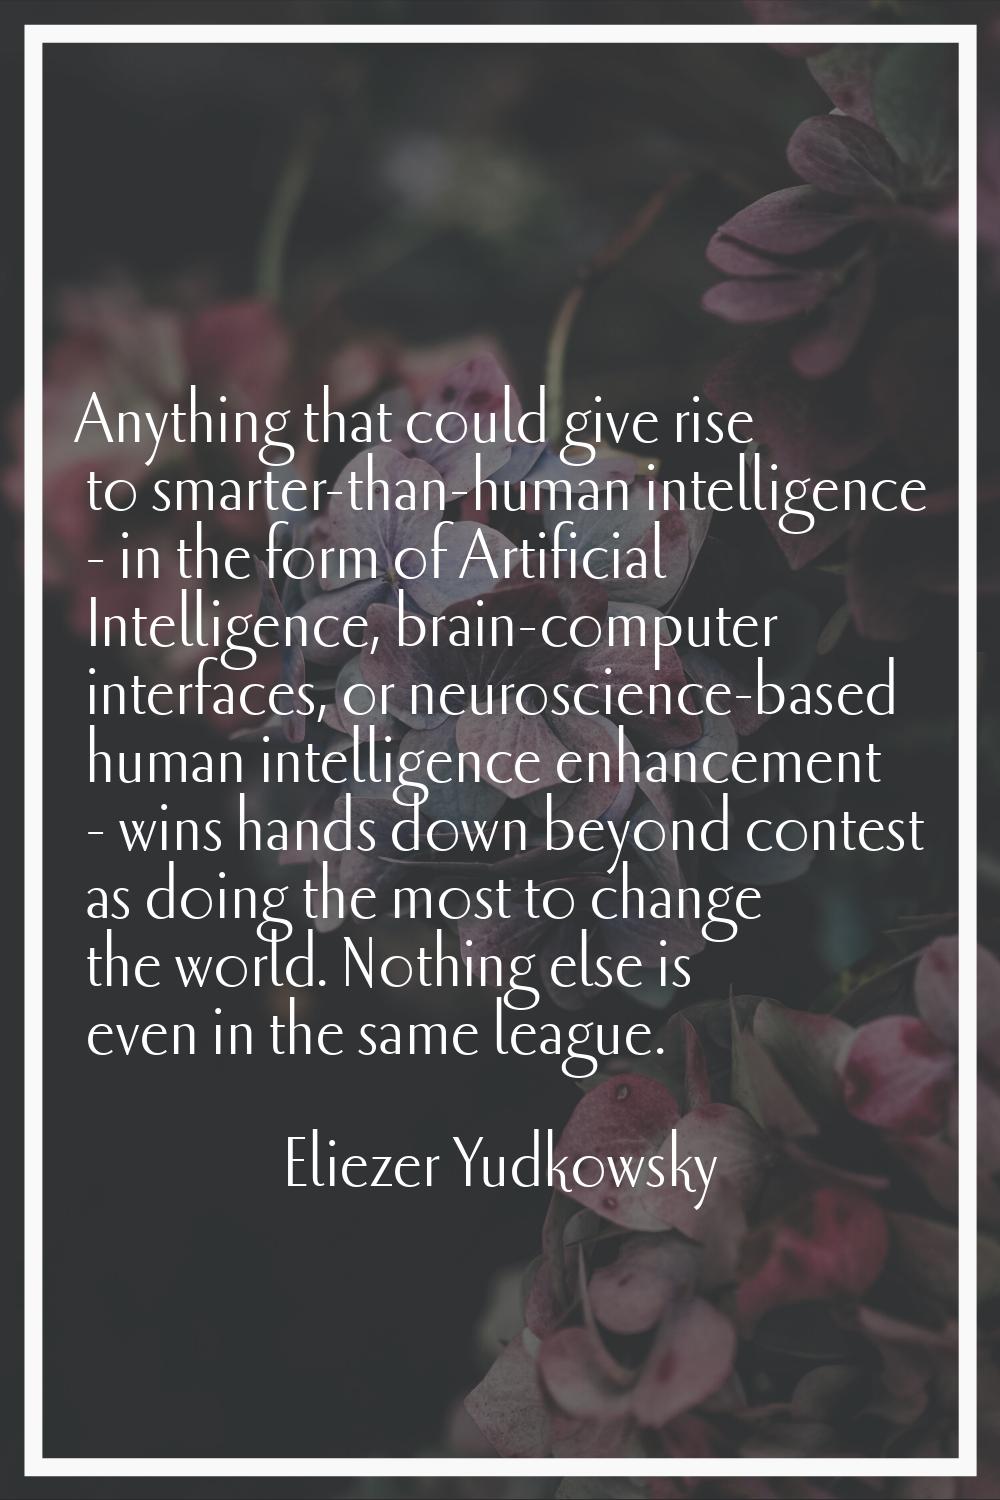 Anything that could give rise to smarter-than-human intelligence - in the form of Artificial Intell